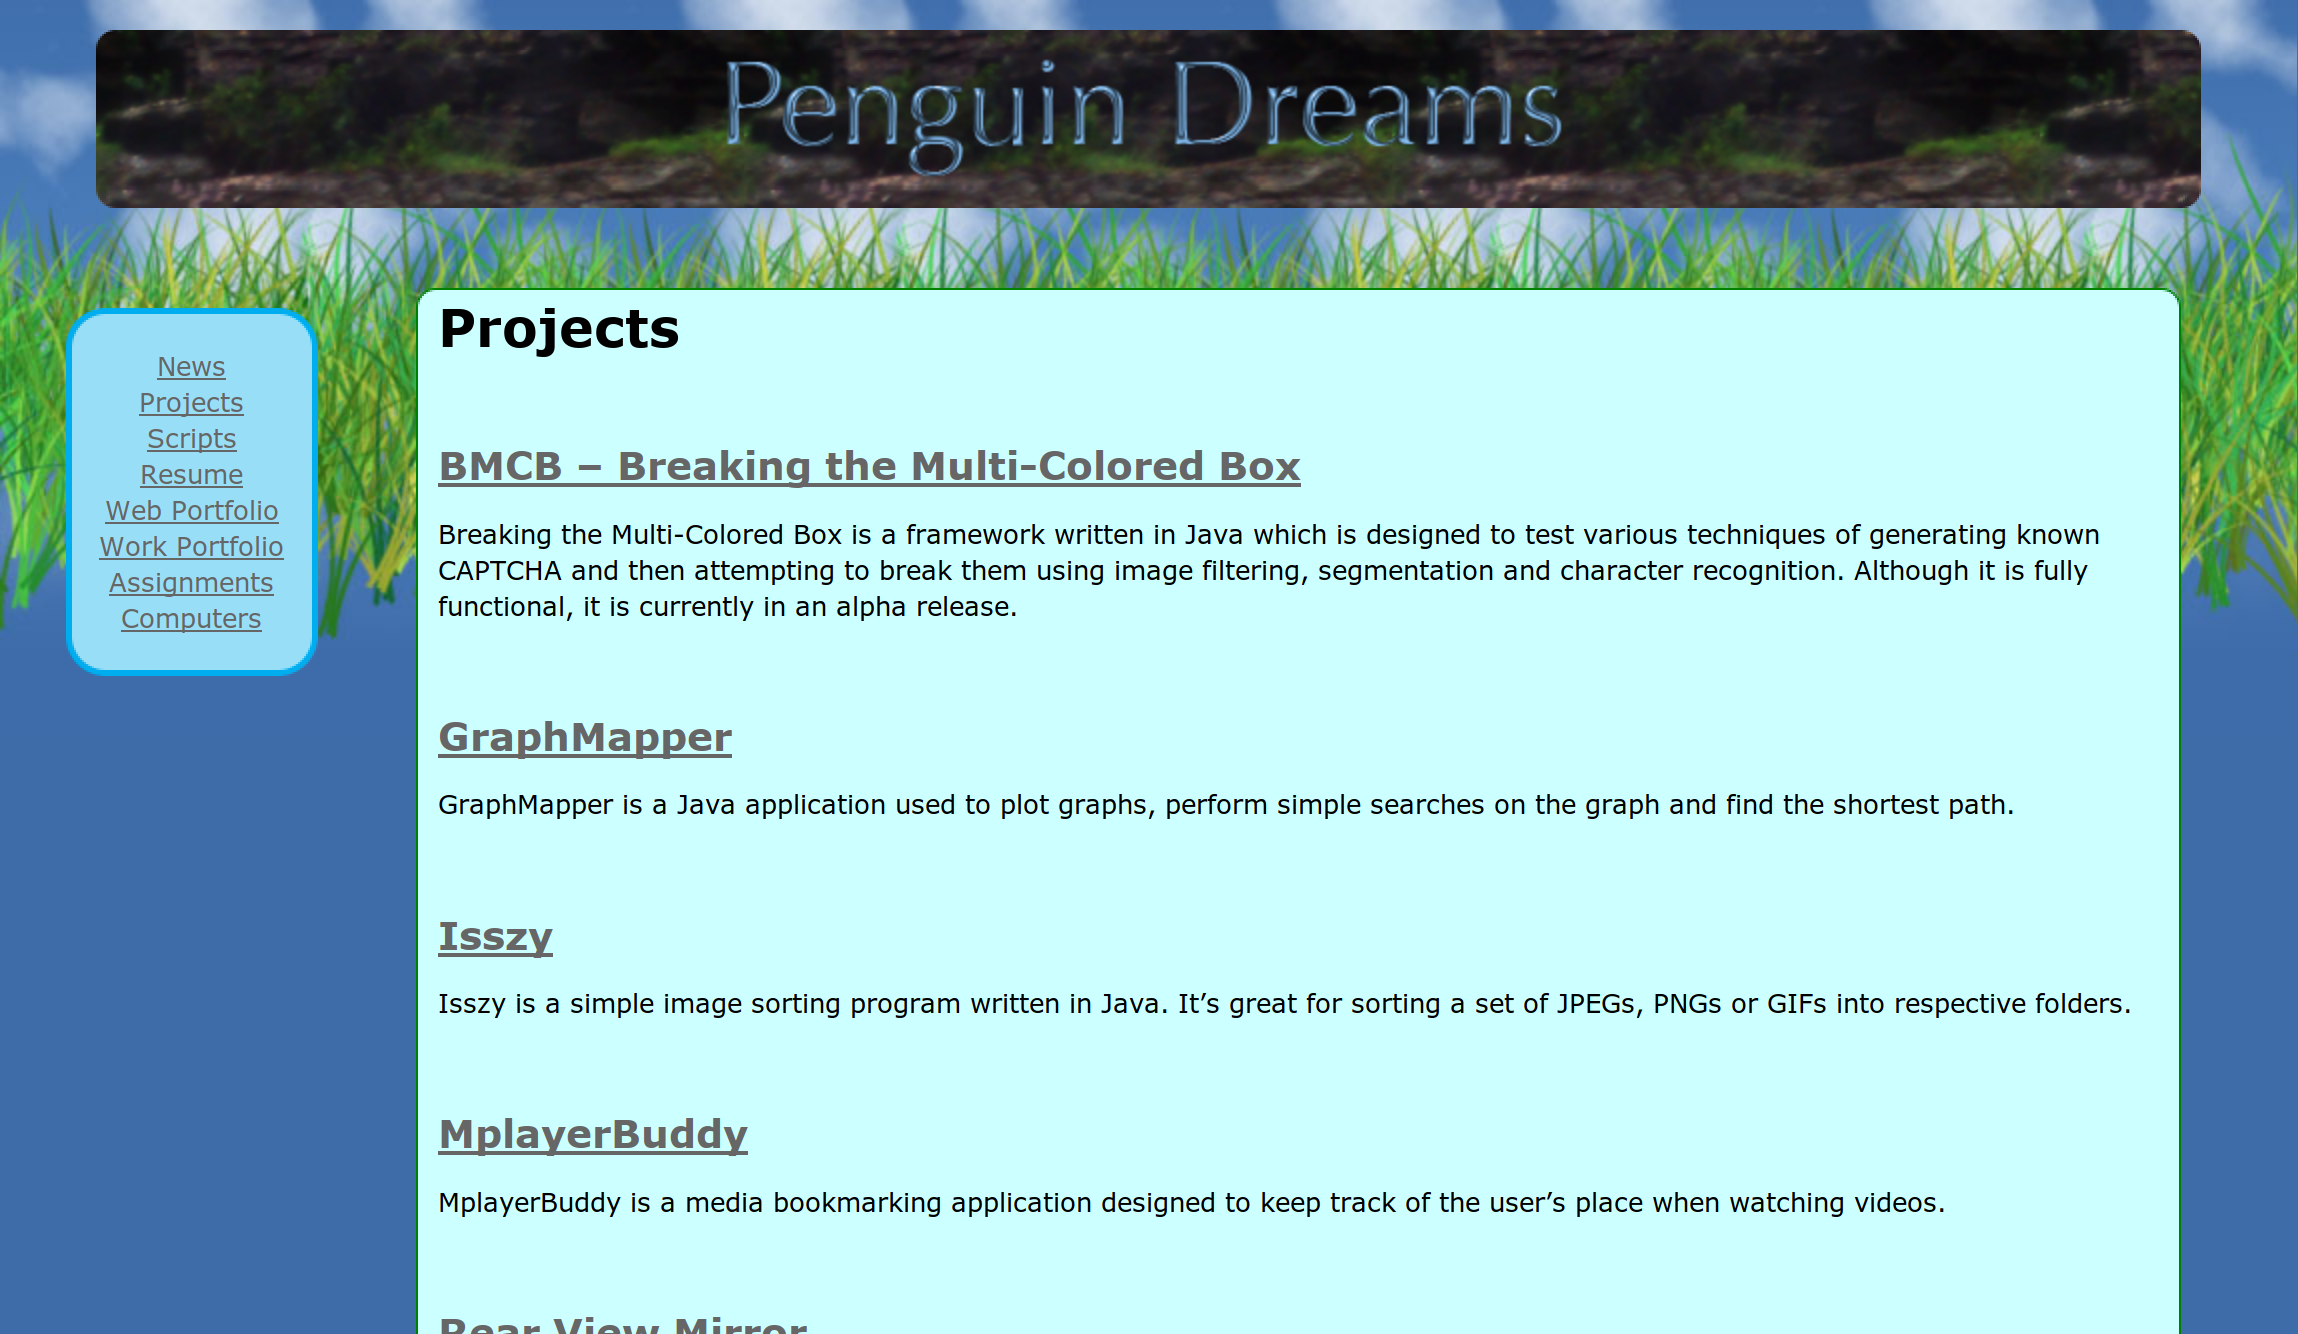 Projects page of the redesigned version of my professional website